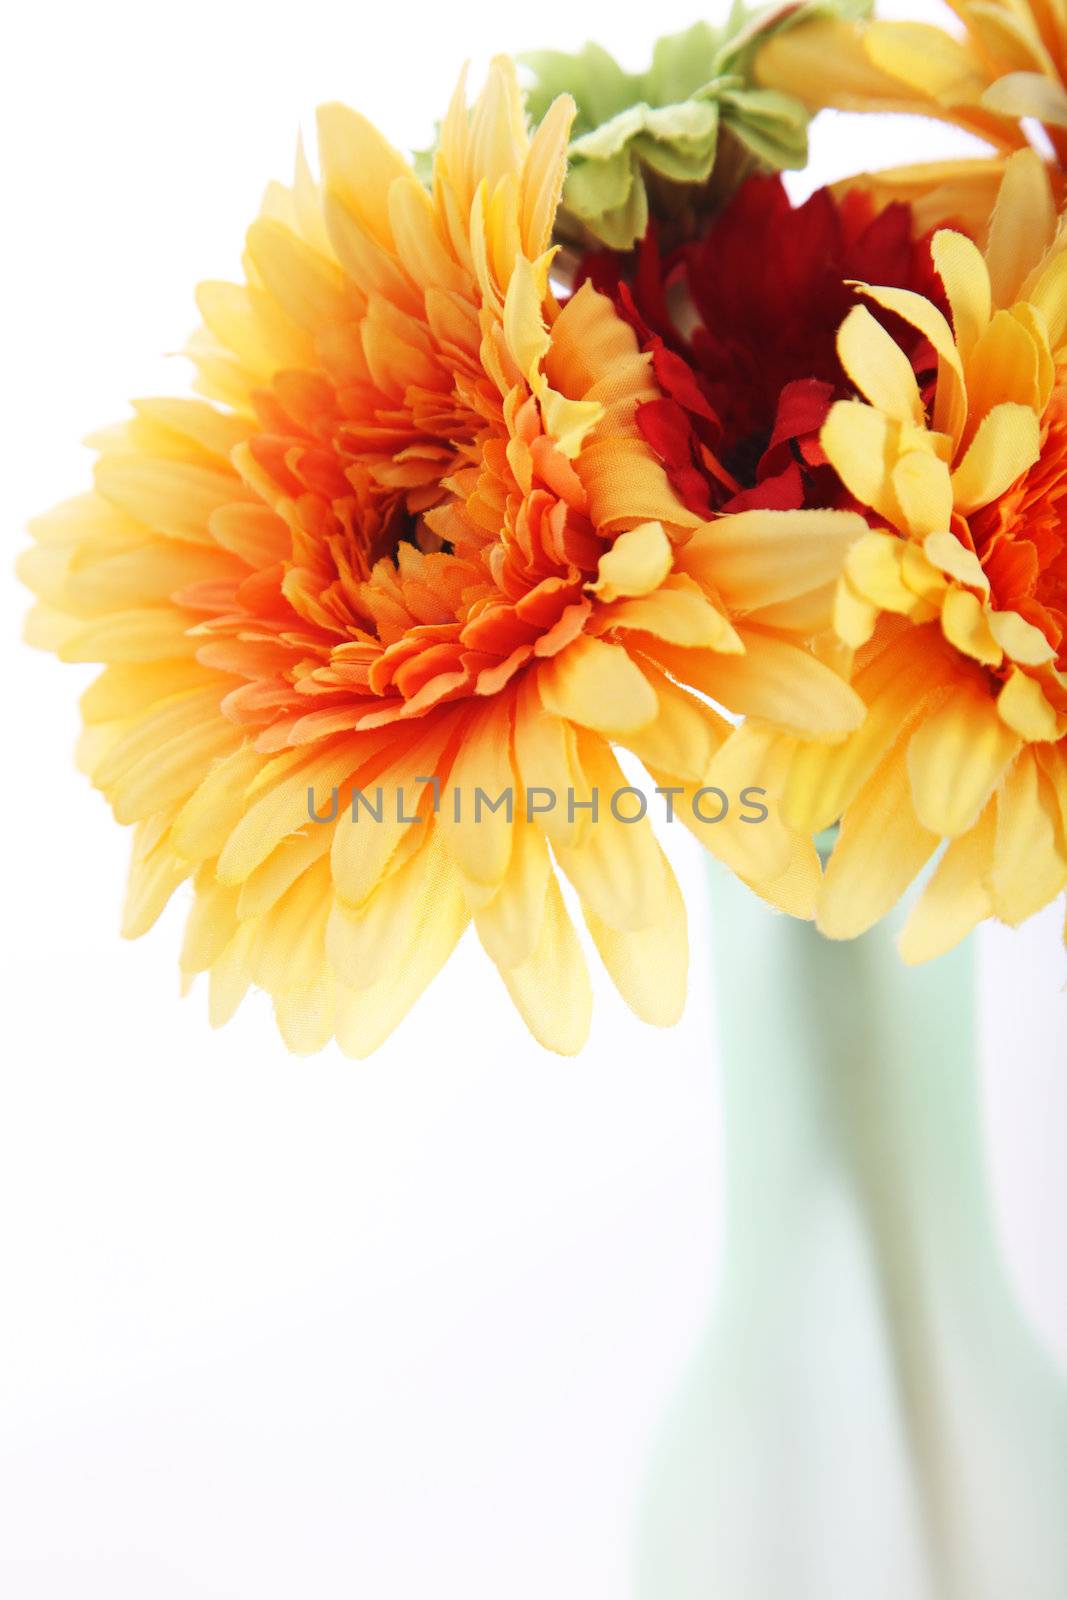 Closeup of ornamental cut orange dahlias in a frosted glass vase isolated on a white background 